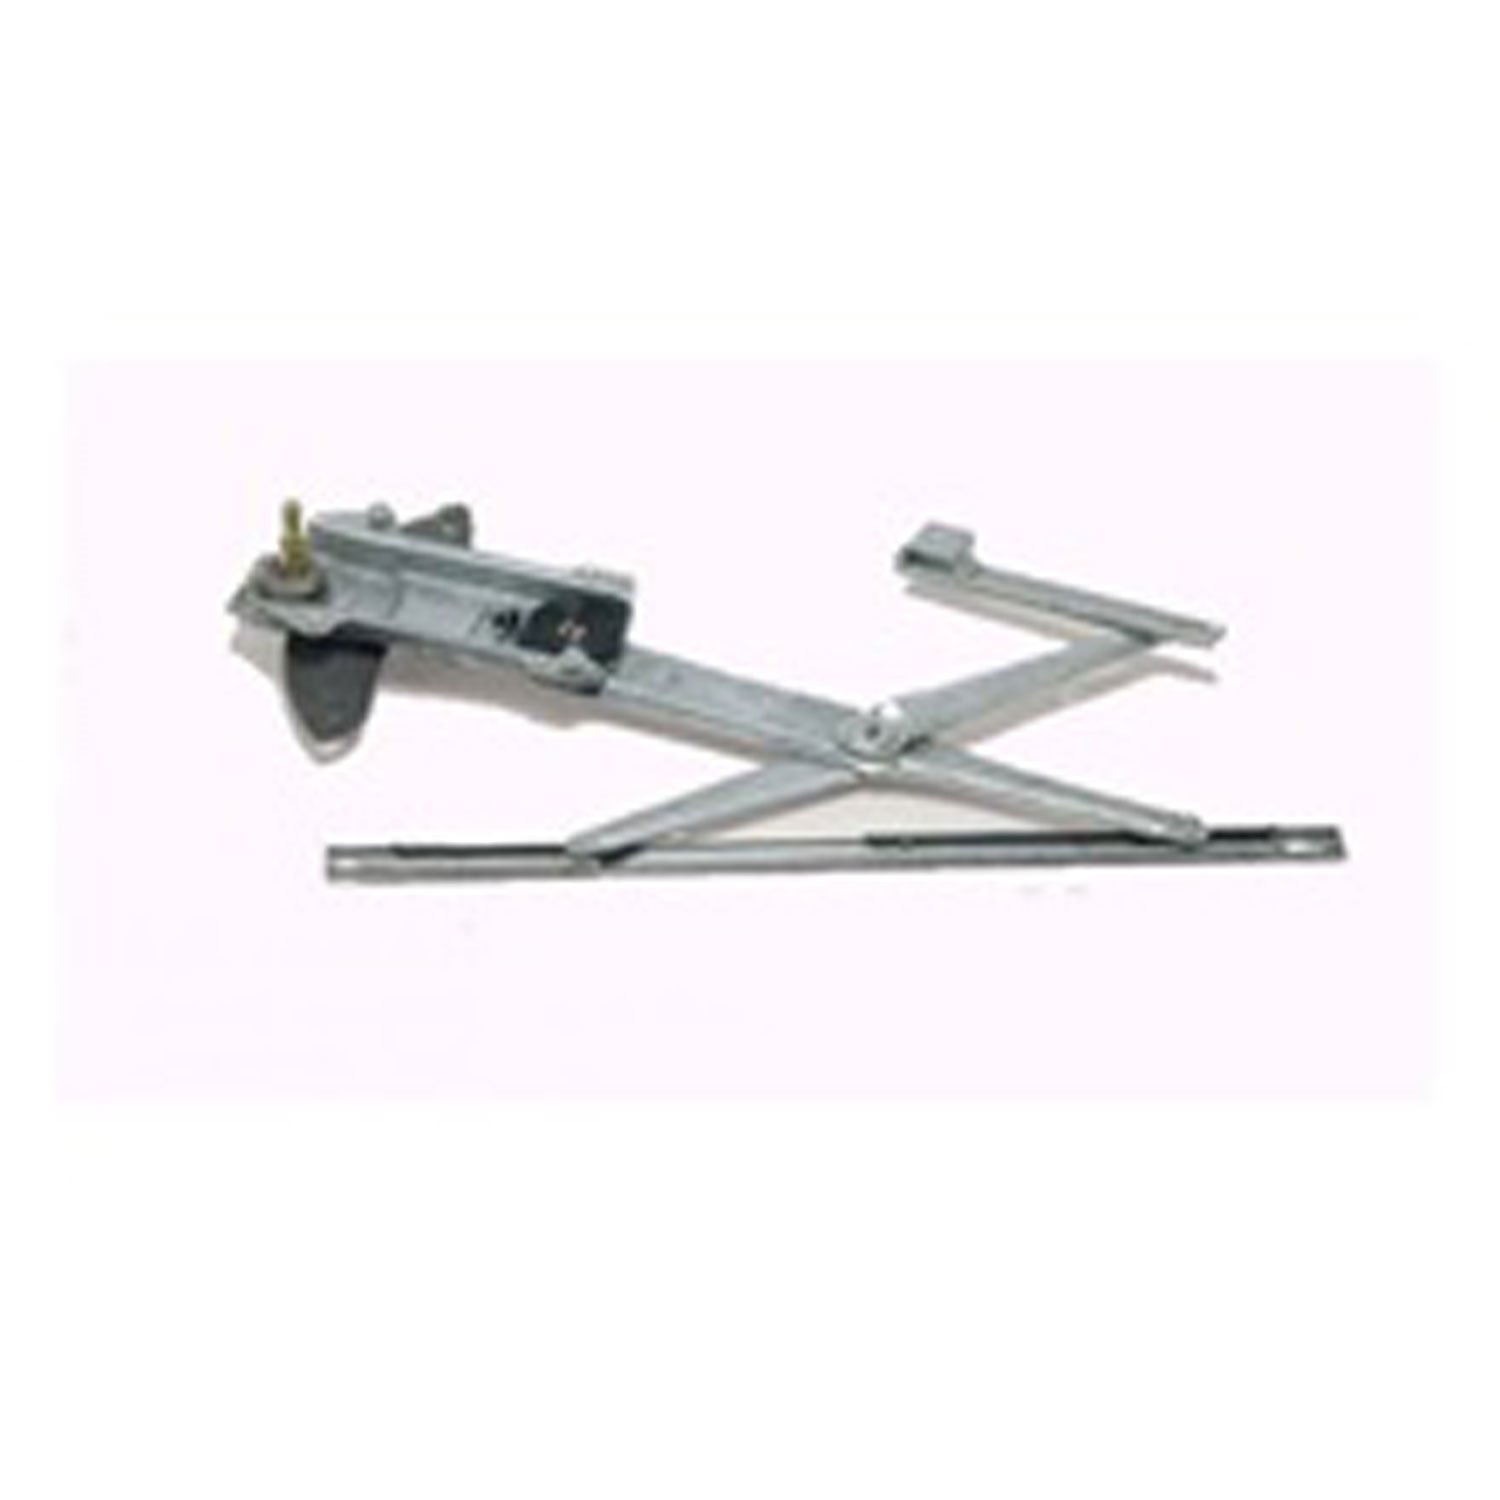 This manual window regulator from Omix-ADA fits the